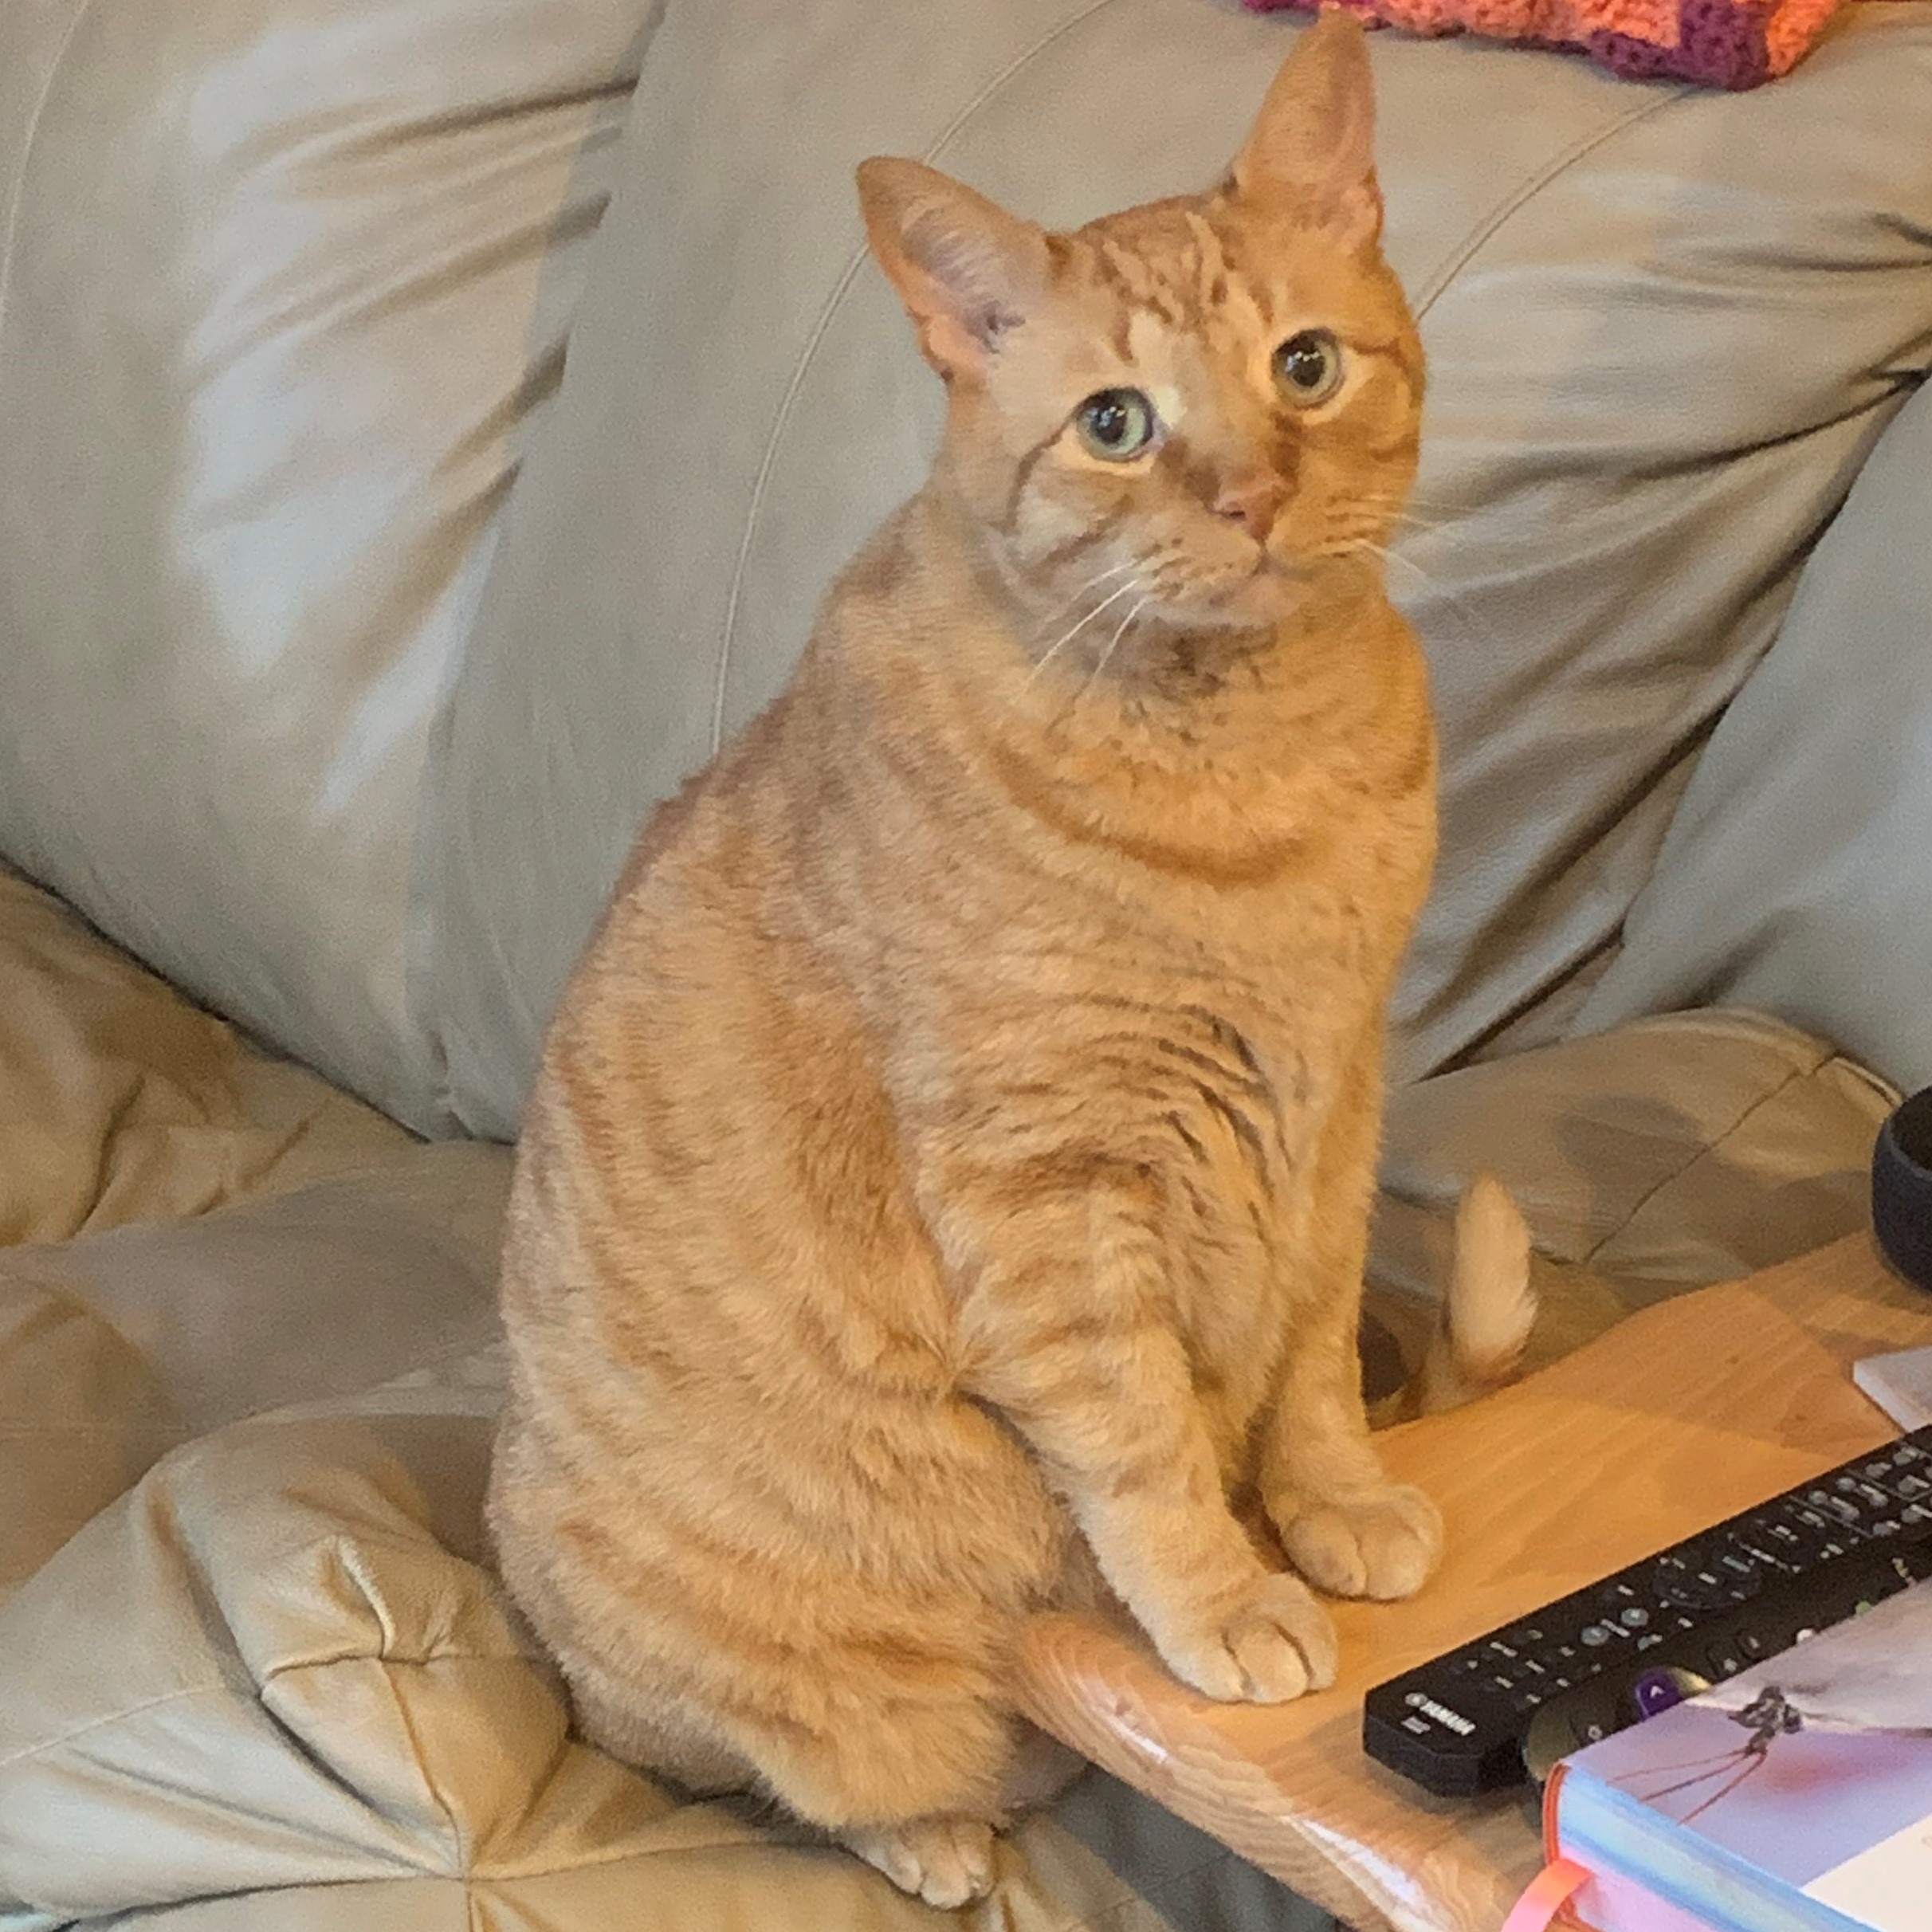 a picture of stanley from a distance. he is sitting on his back legs on the arm of a couch with his front paws on the slightly-higher end table, making him look like he is standing like a human. he is looking at the camera